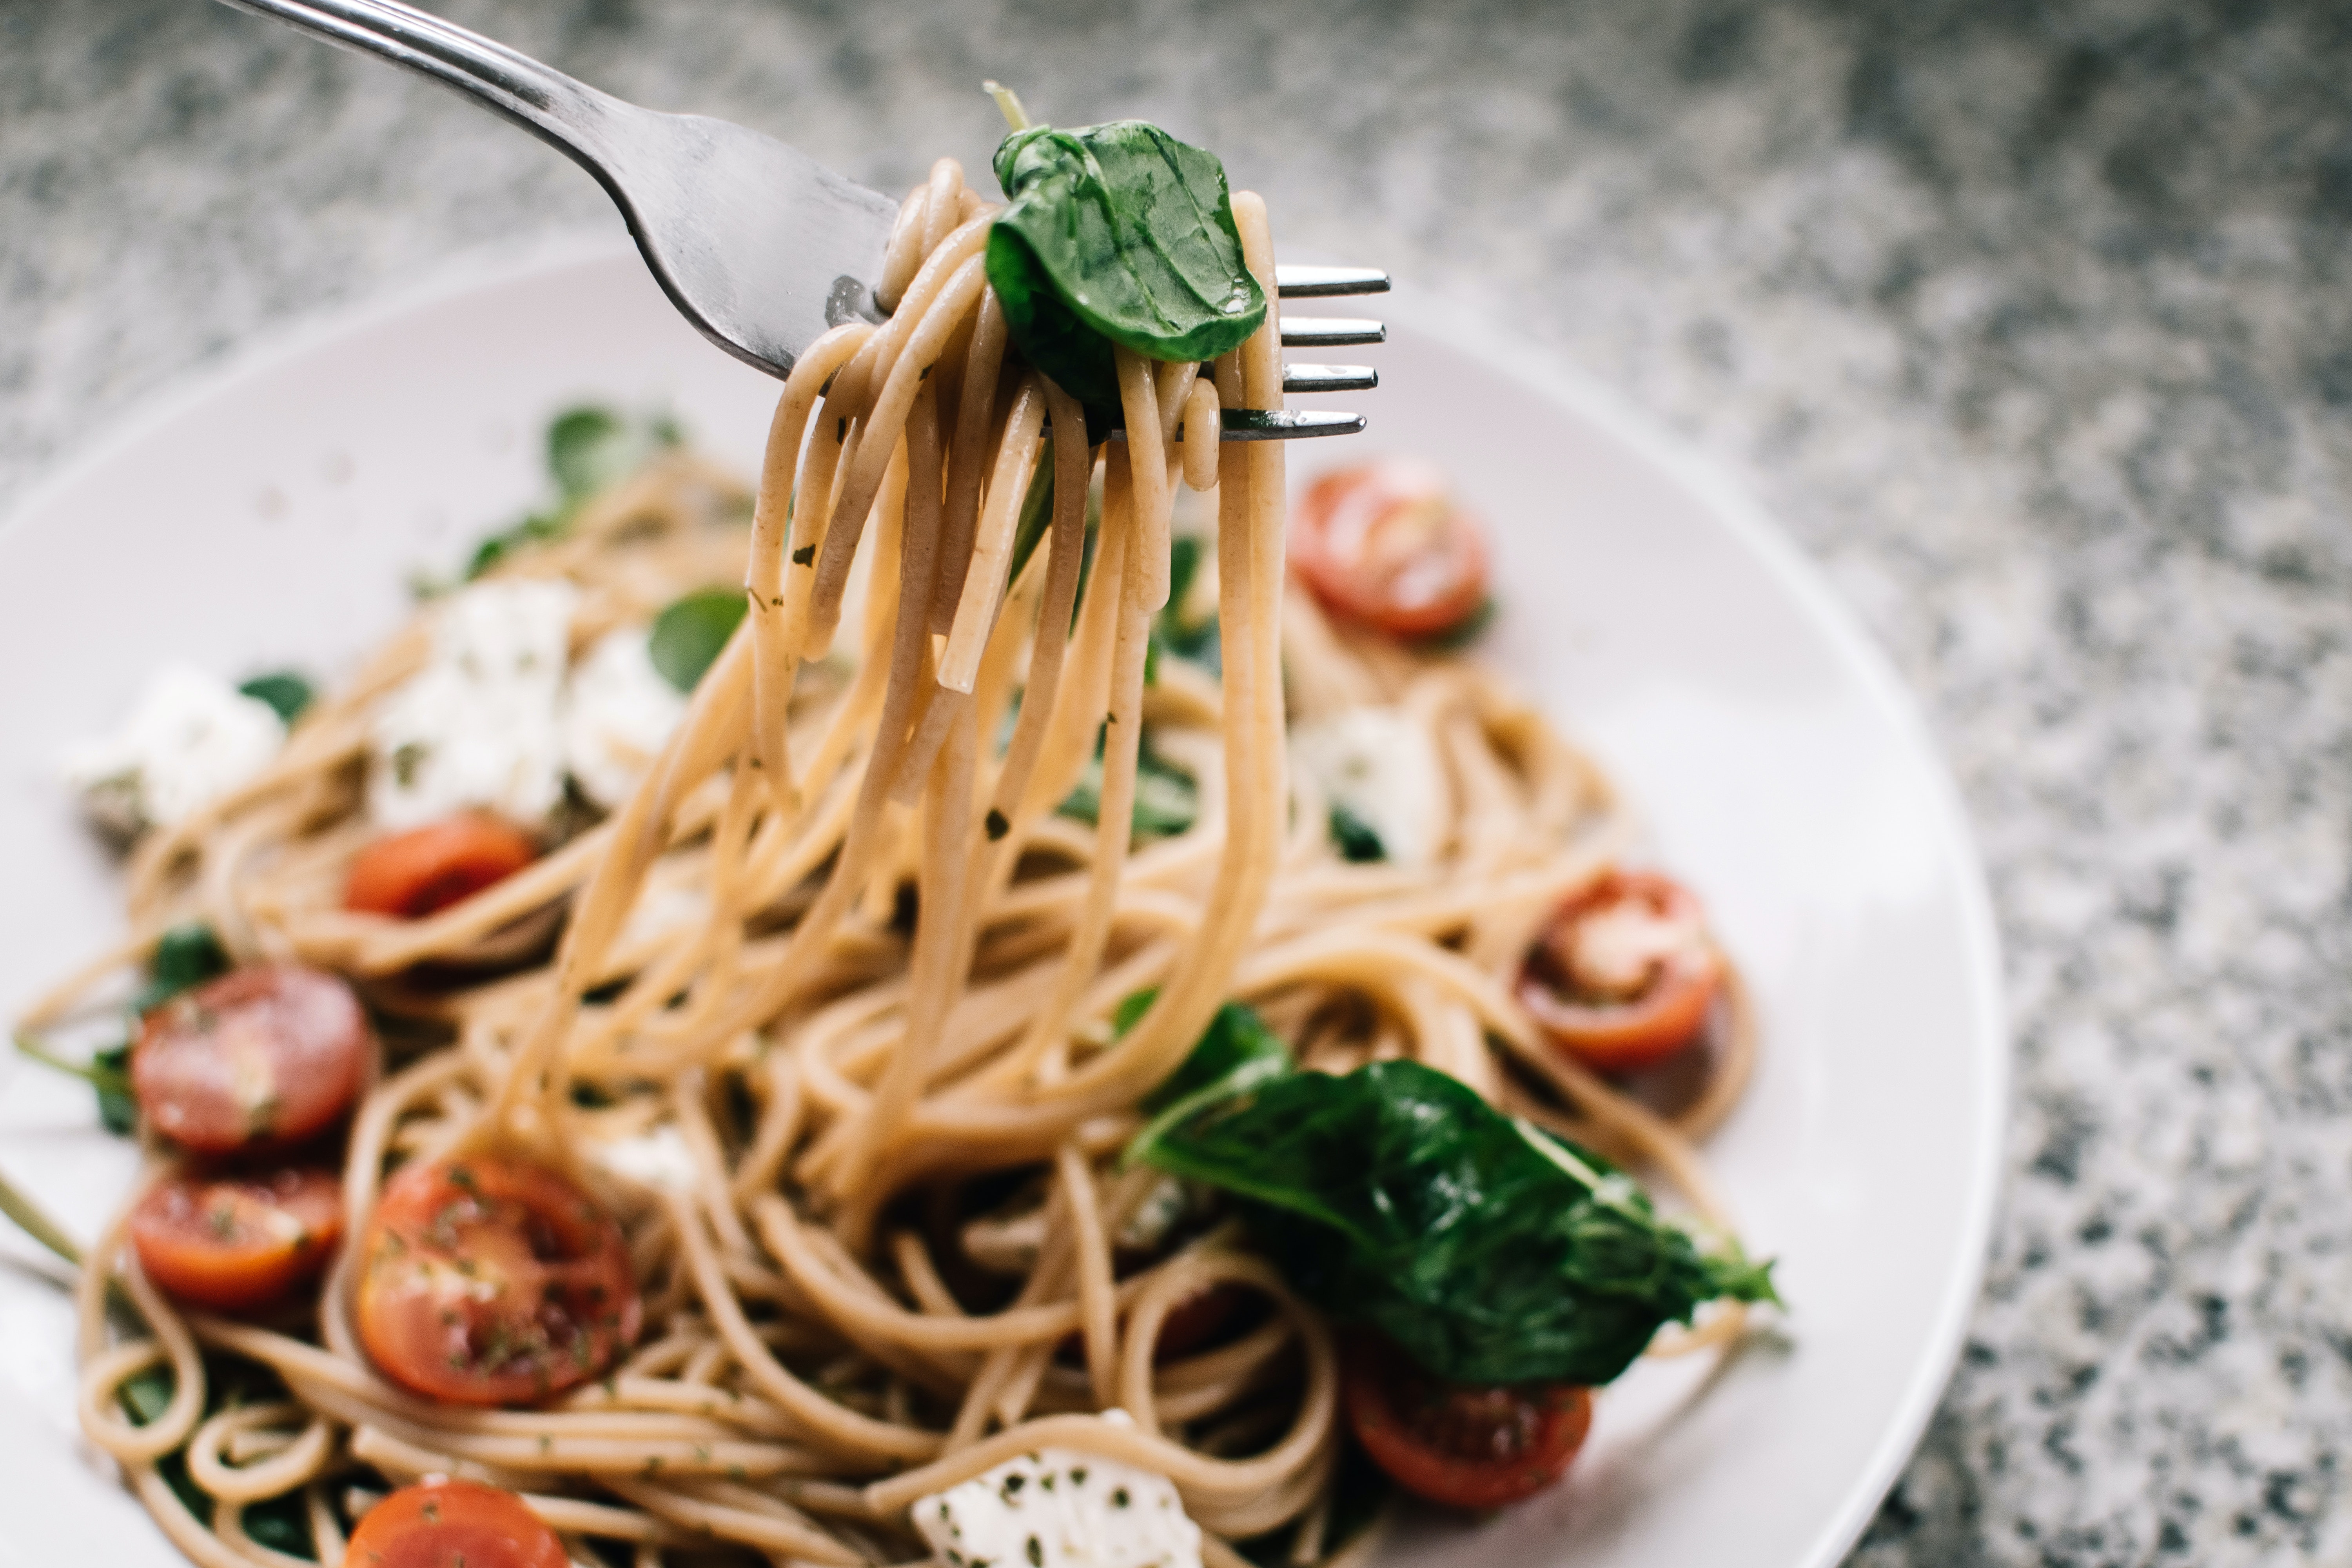 https://www.foodkonjac.com/news/what-pasta-is-best-for-weight-loss/